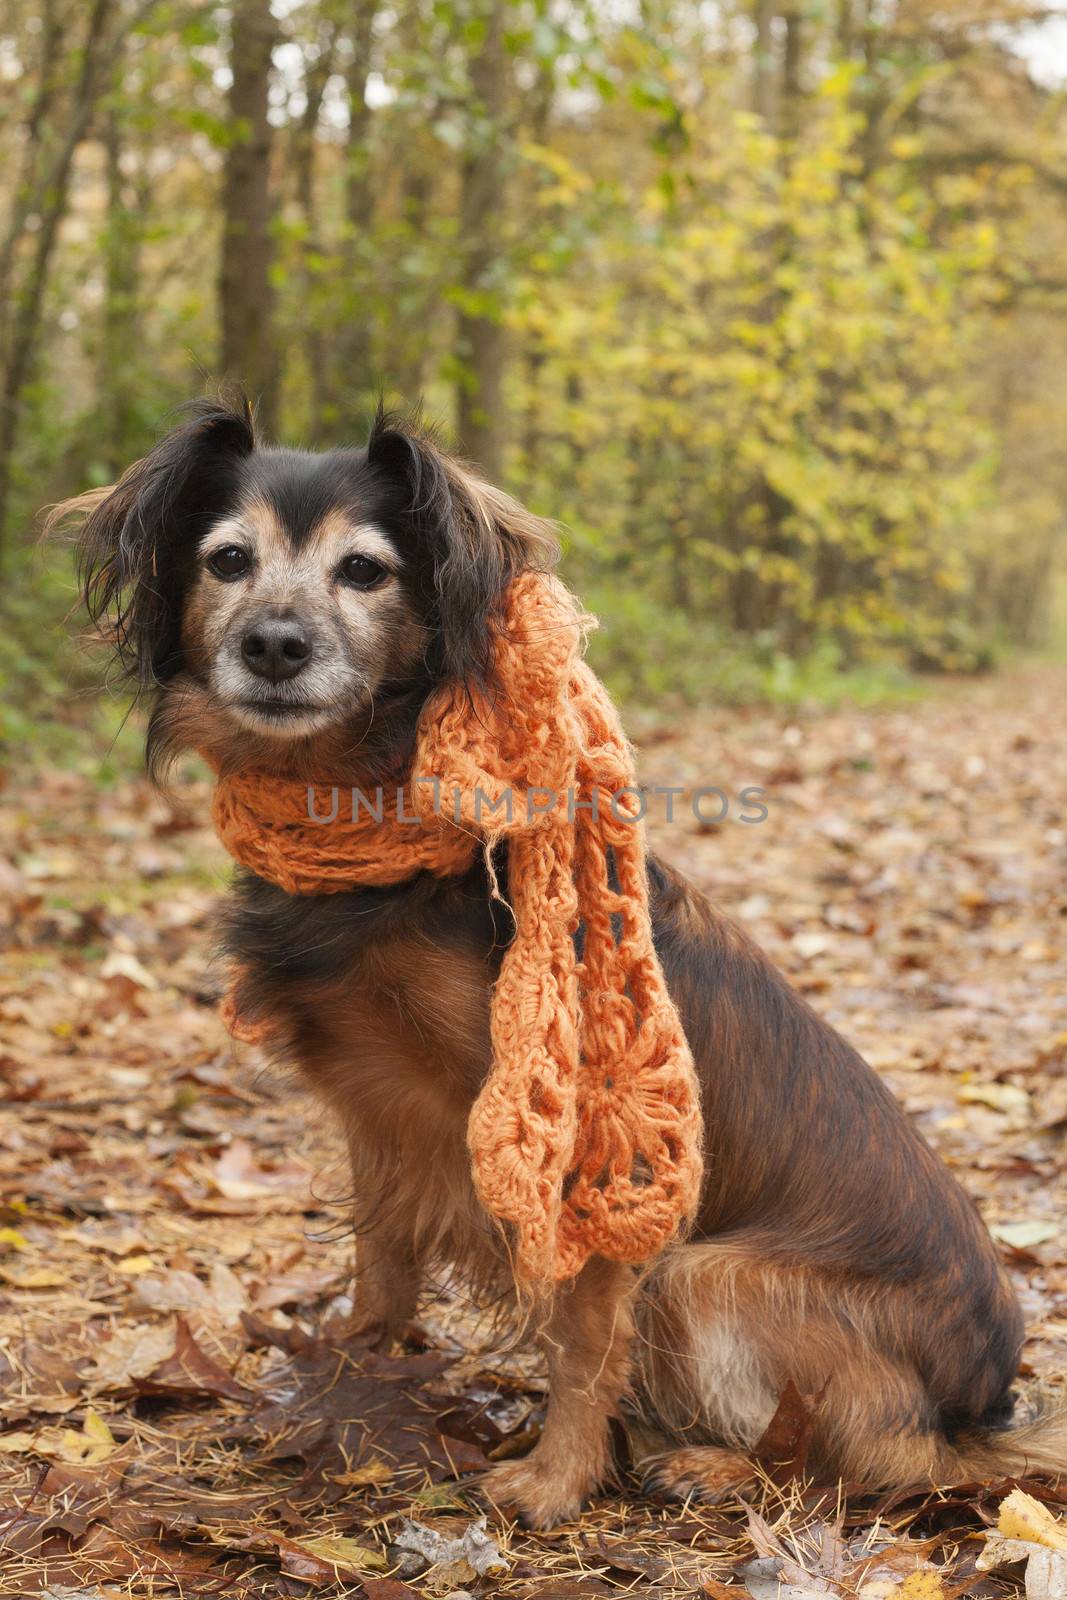 Cute sitting dog in the autumn forest